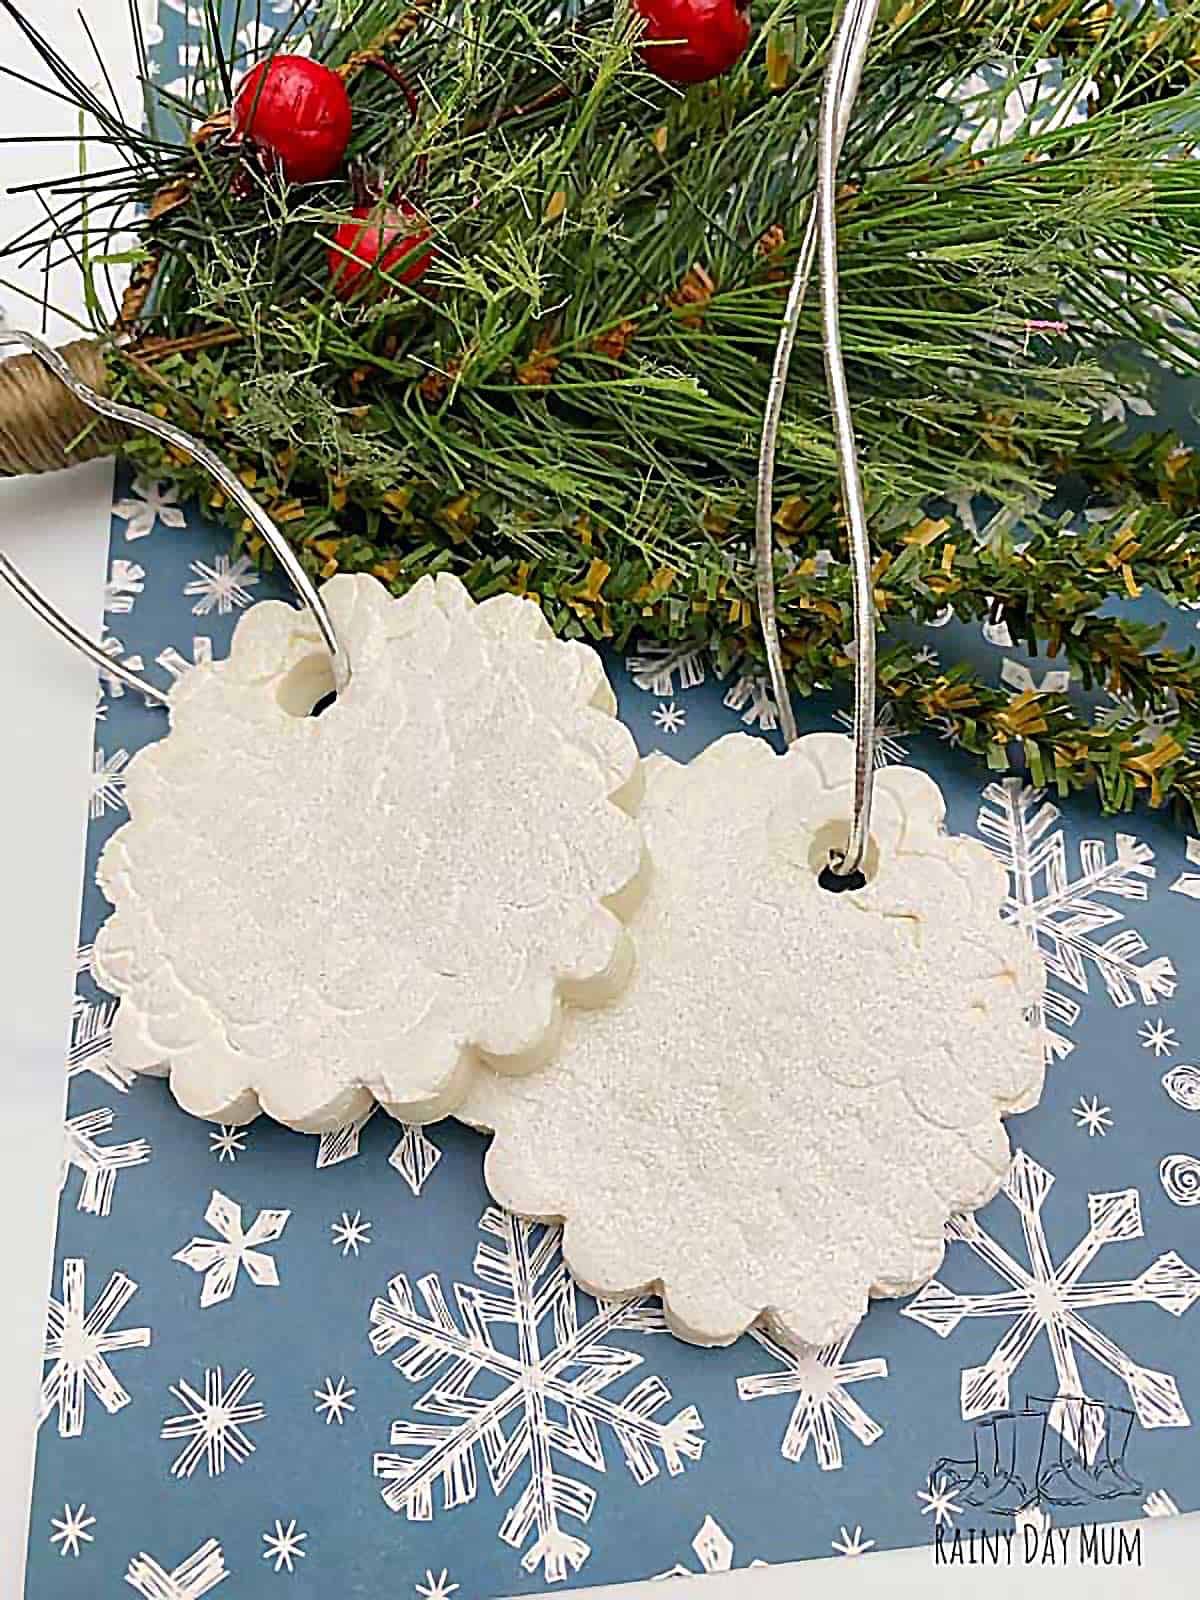 Clay textured Christmas tree ornament with fluted edges painted sparkly champagne and tied with gold string.